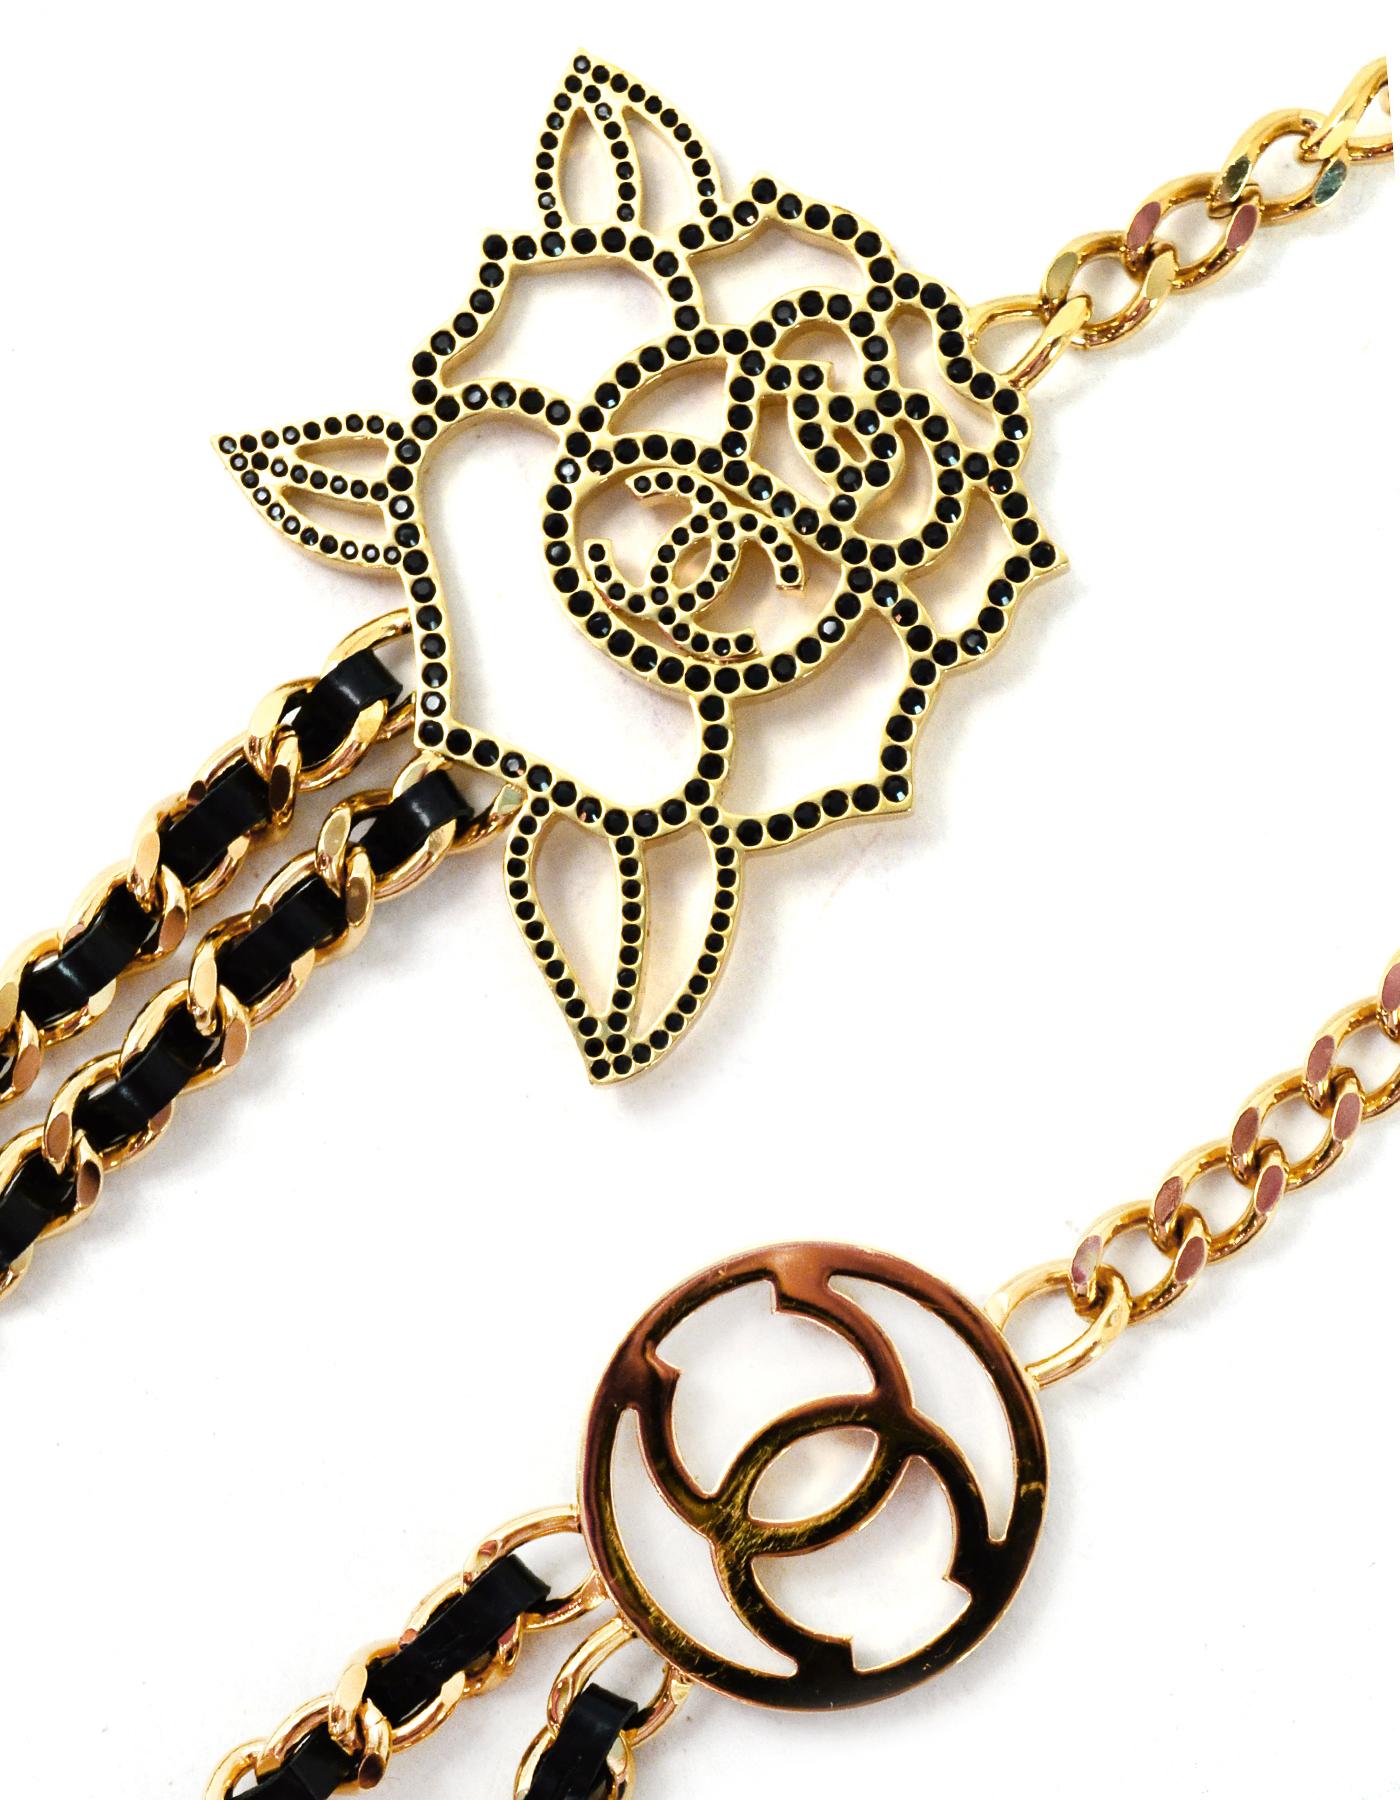 Women's Chanel 2017 Black/Gold Leather Laced Necklace W/ Crystal CC & Camellia